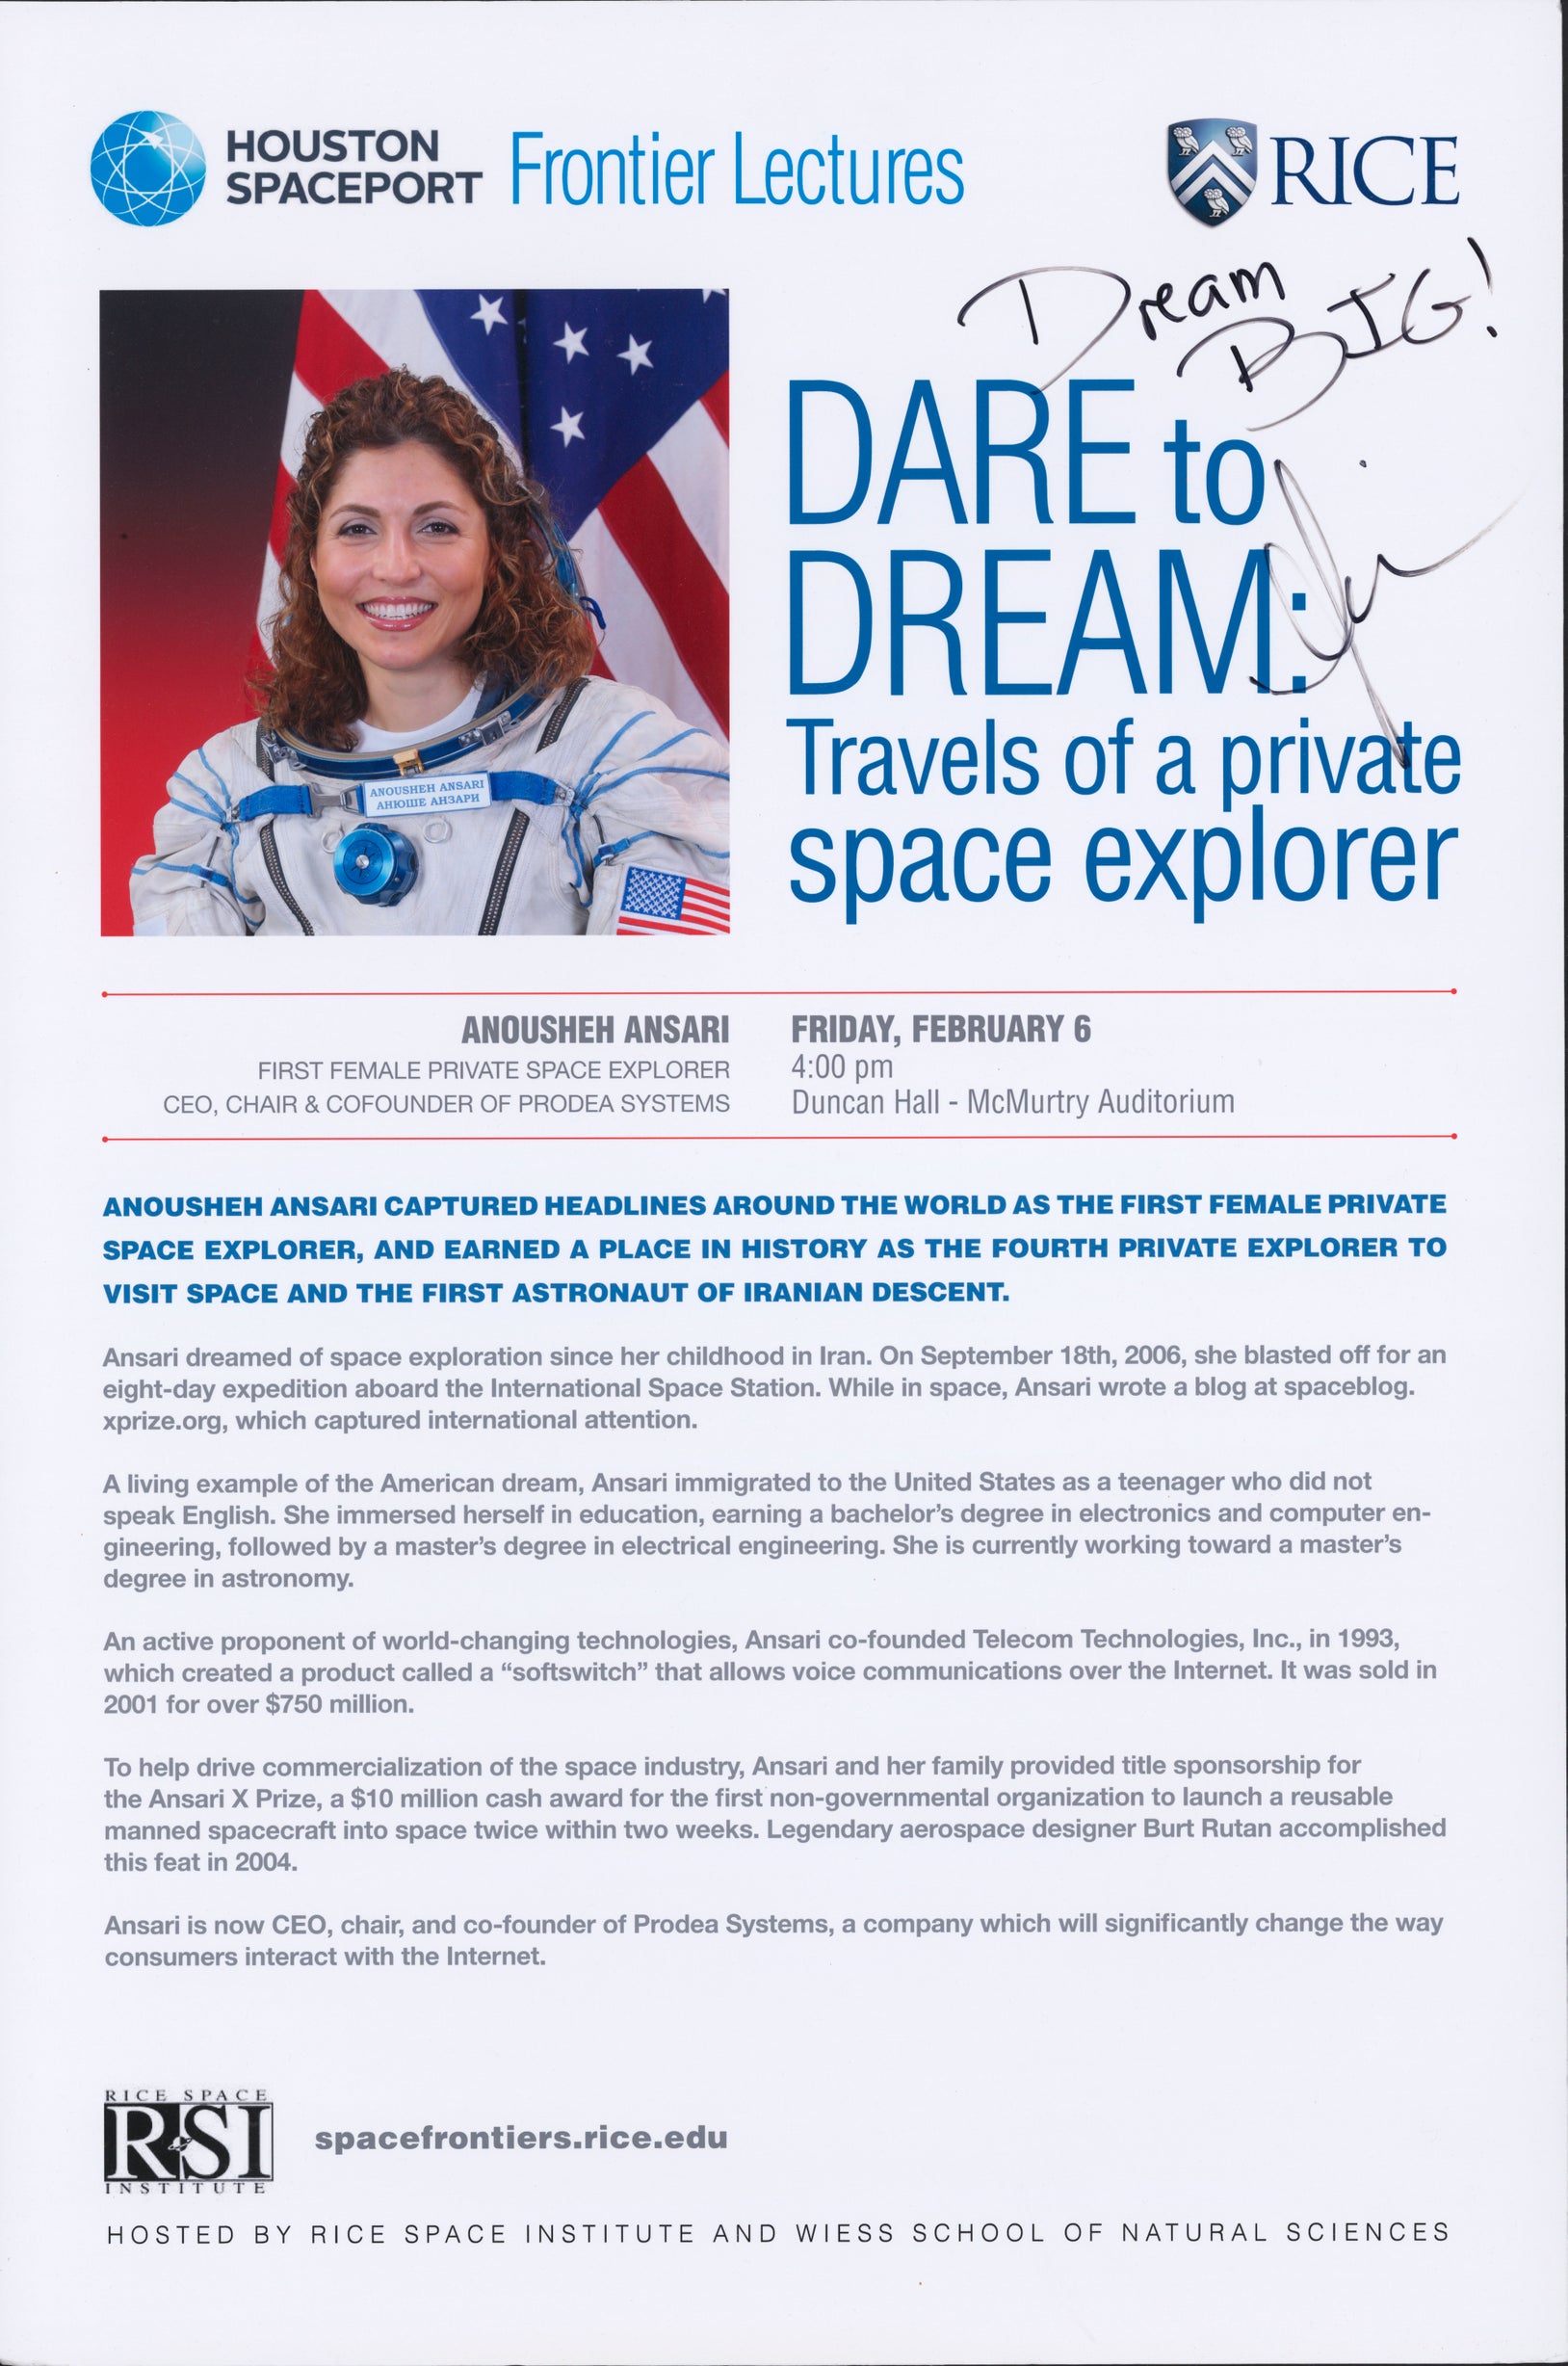 Poster of "Dare to Dream: Travels of a private space explorer" by Anousheh Ansari